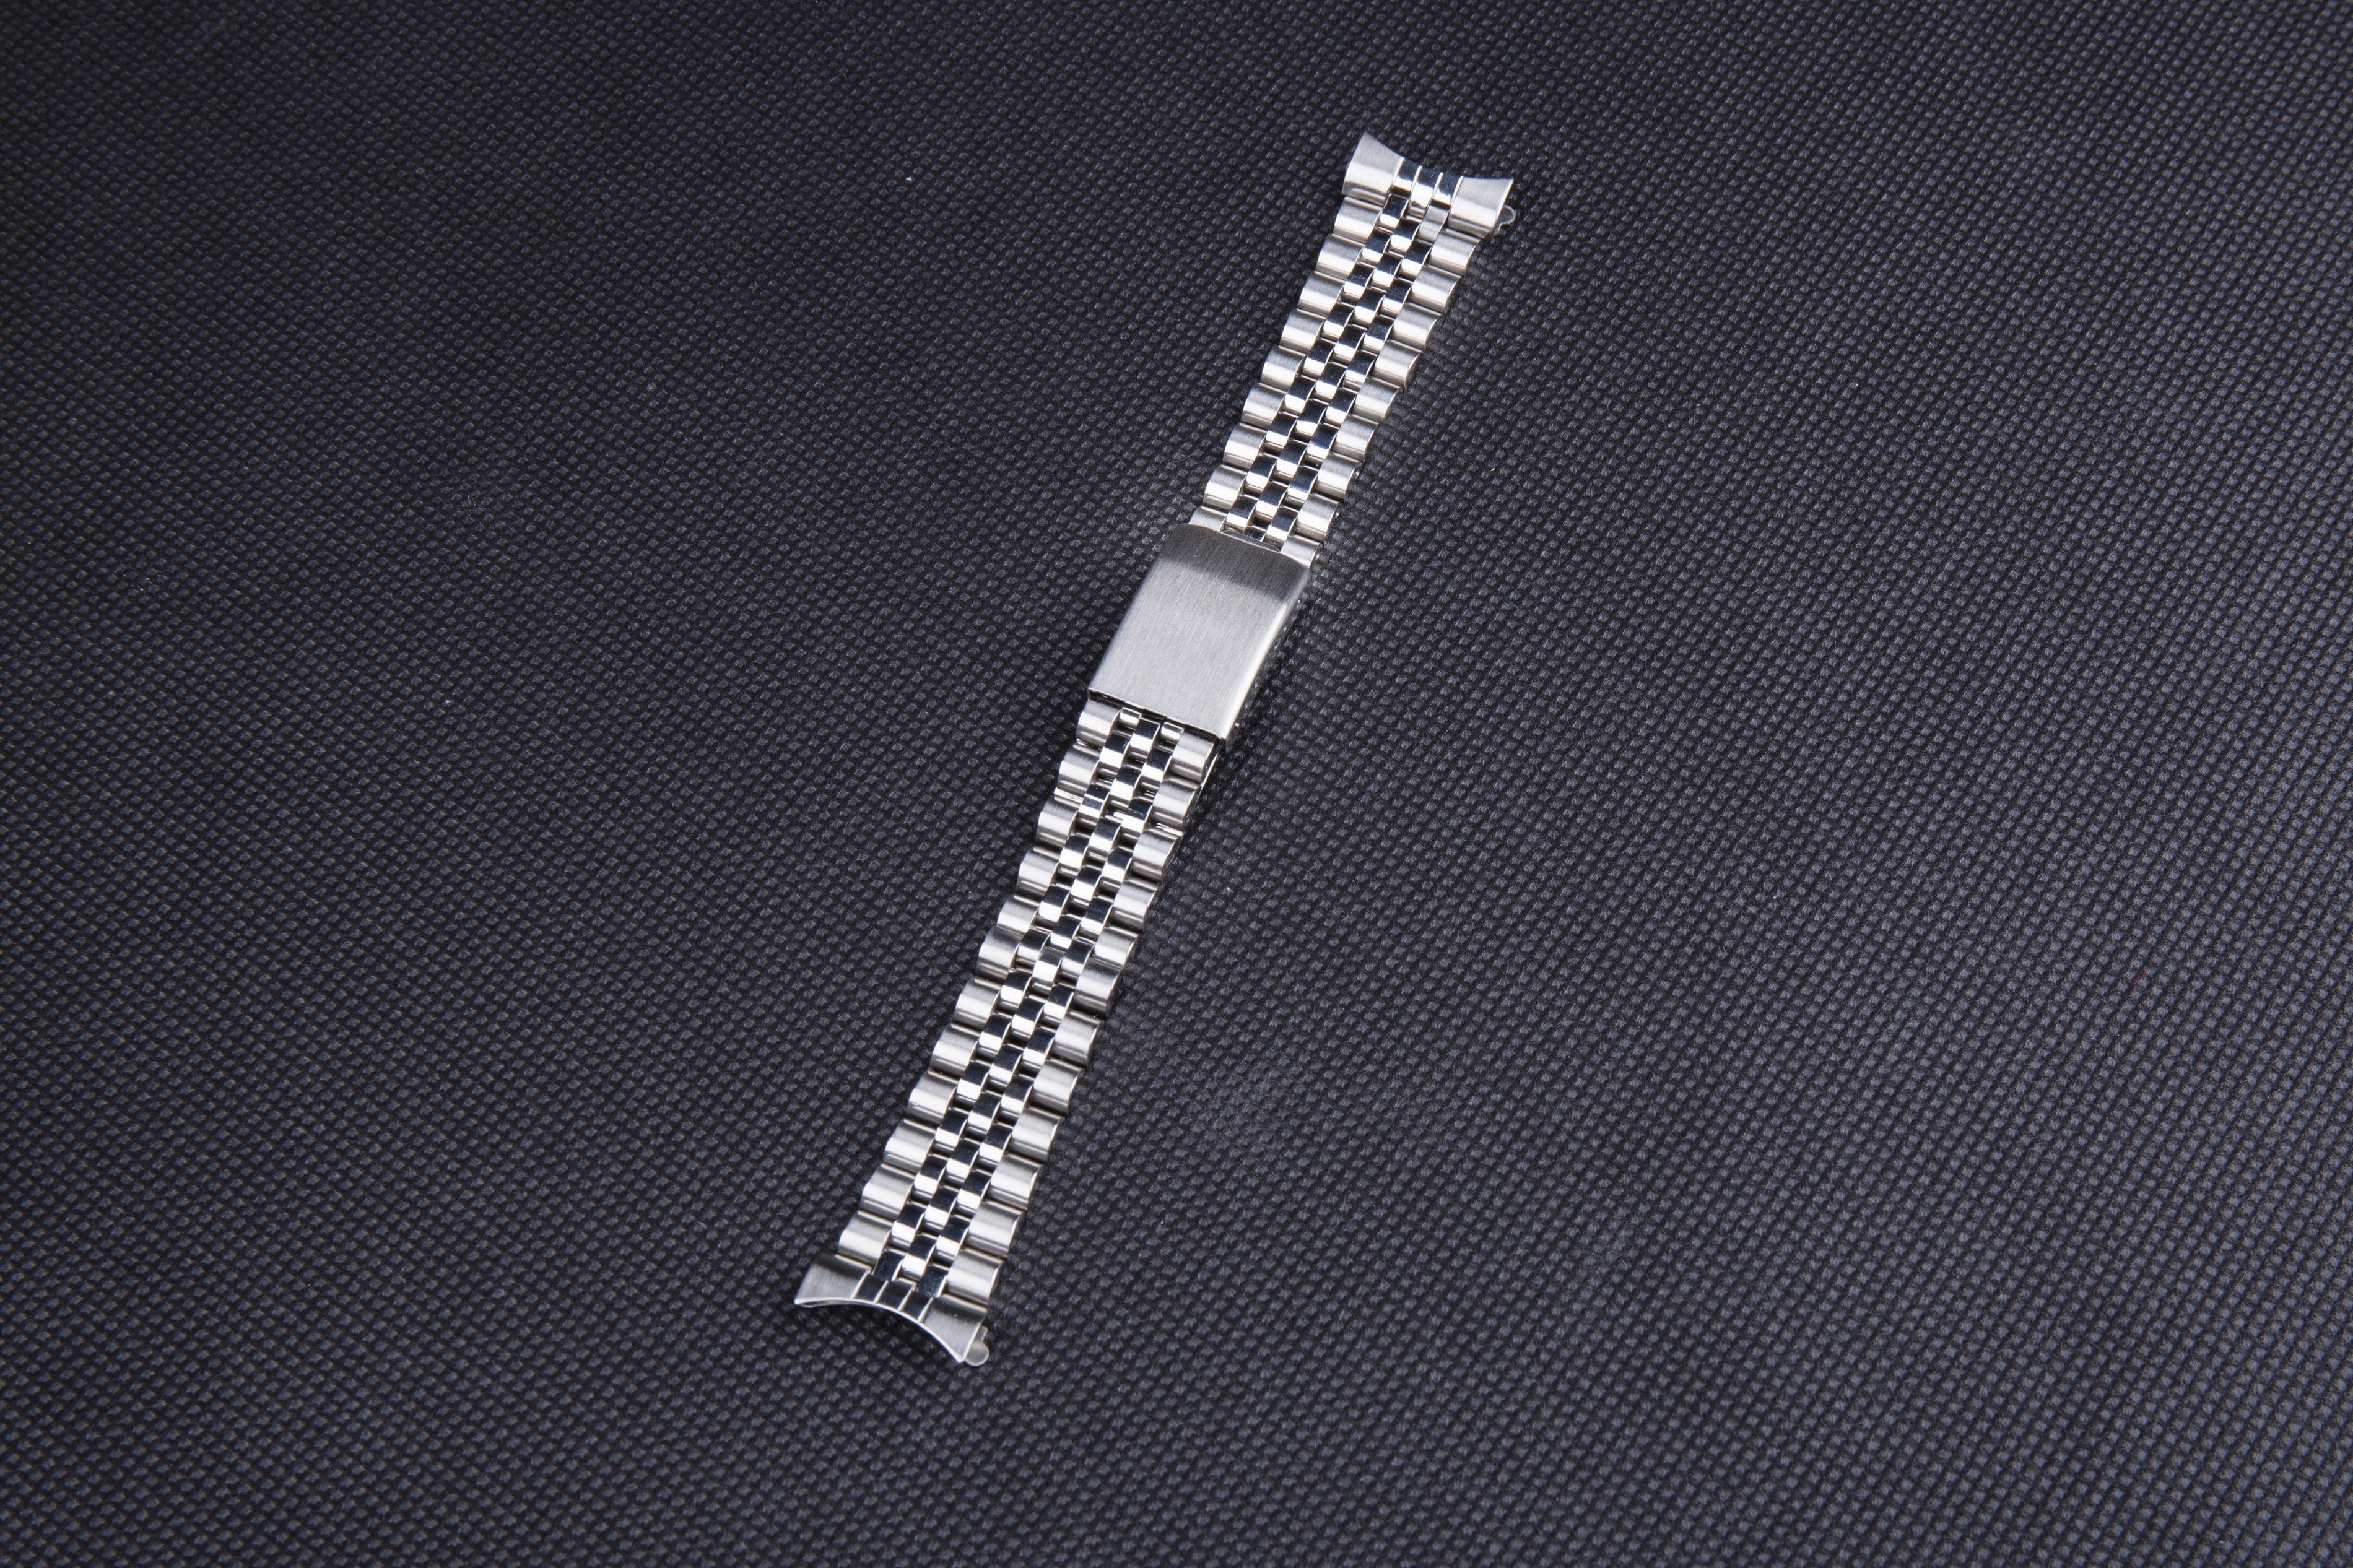 18mm 19mm 20mm 316L Stainless Steel Jubilee Watch Strap Band Bracelet Compatible for Seiko5 Watch